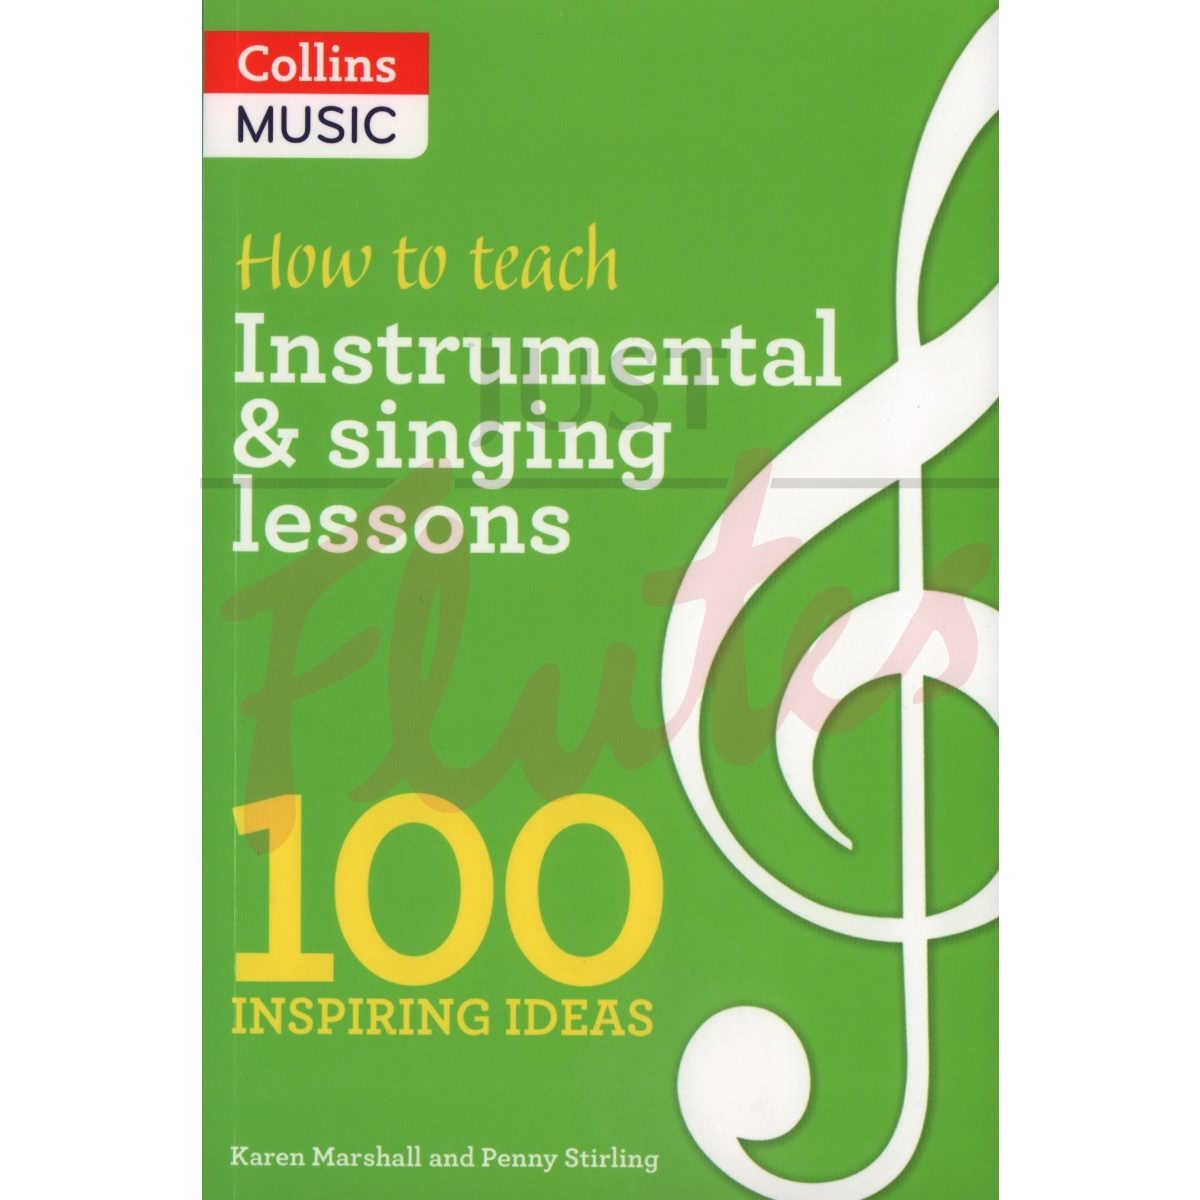 How to Teach Instrumental &amp; Singing Lessons - 100 Inspiring Ideas